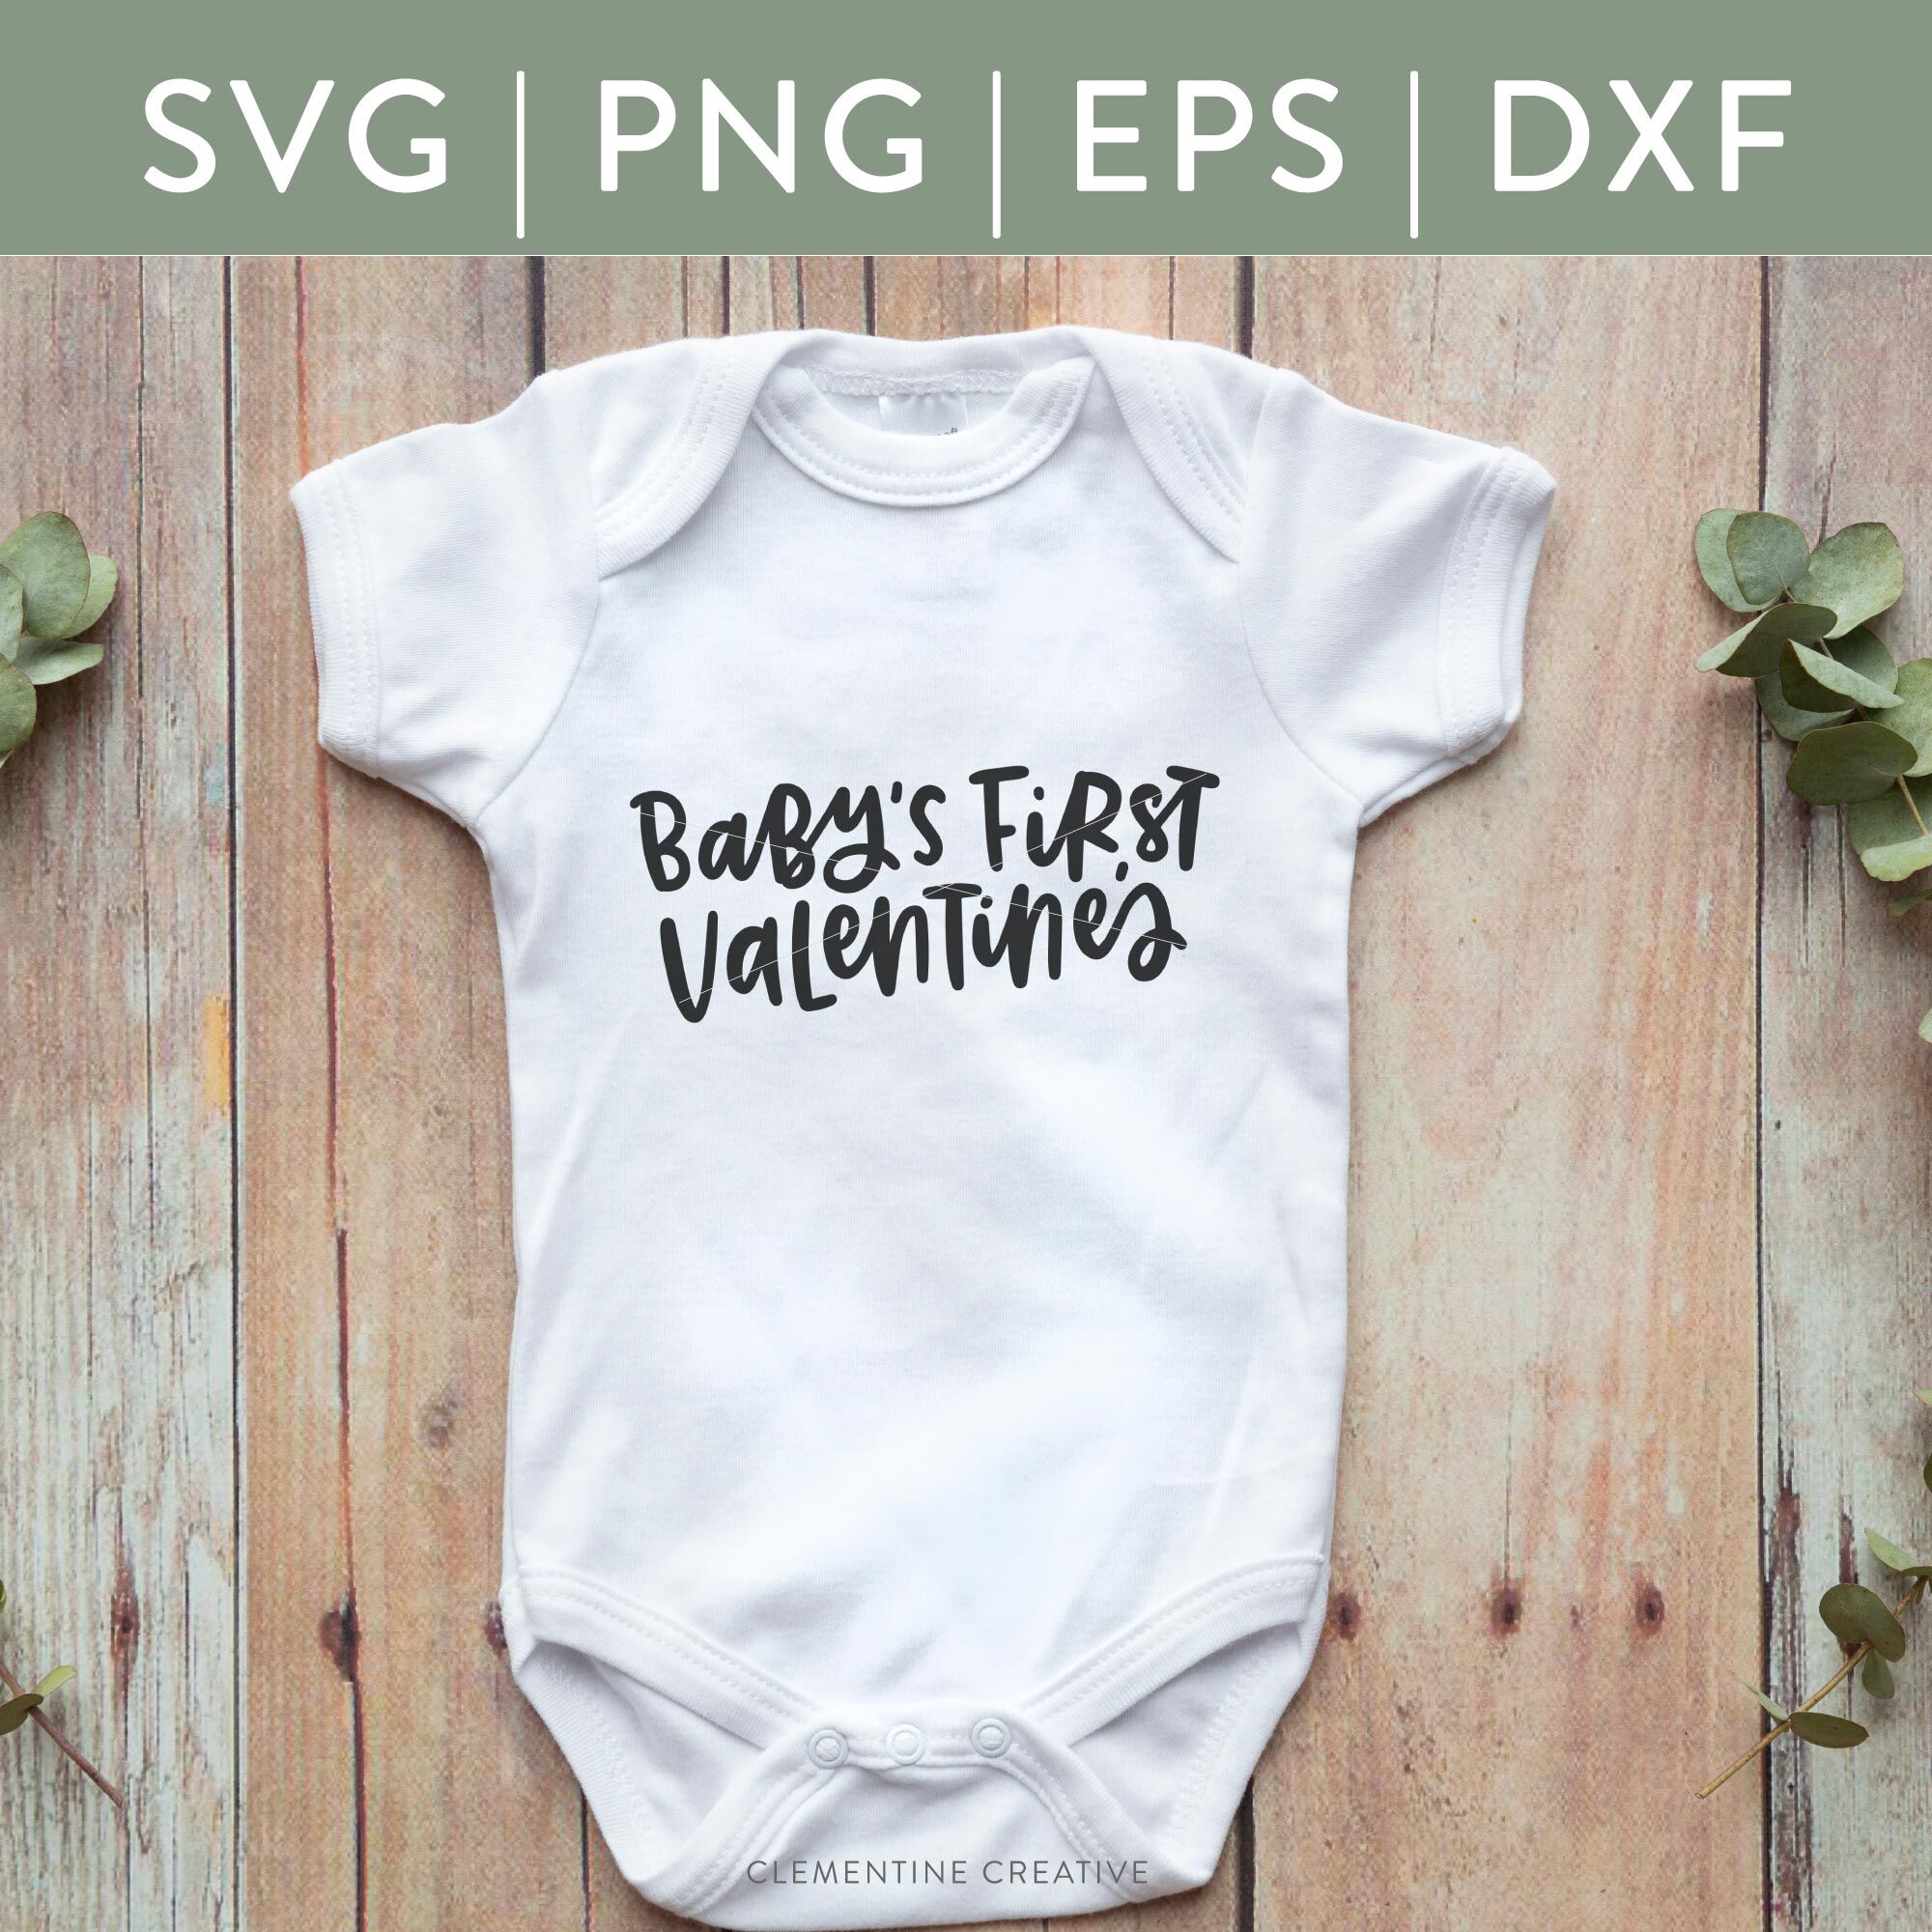 Download Baby S First Valentine S Svg Cut File Valentine S Day Svg Cricut C By Clementine Creative Thehungryjpeg Com